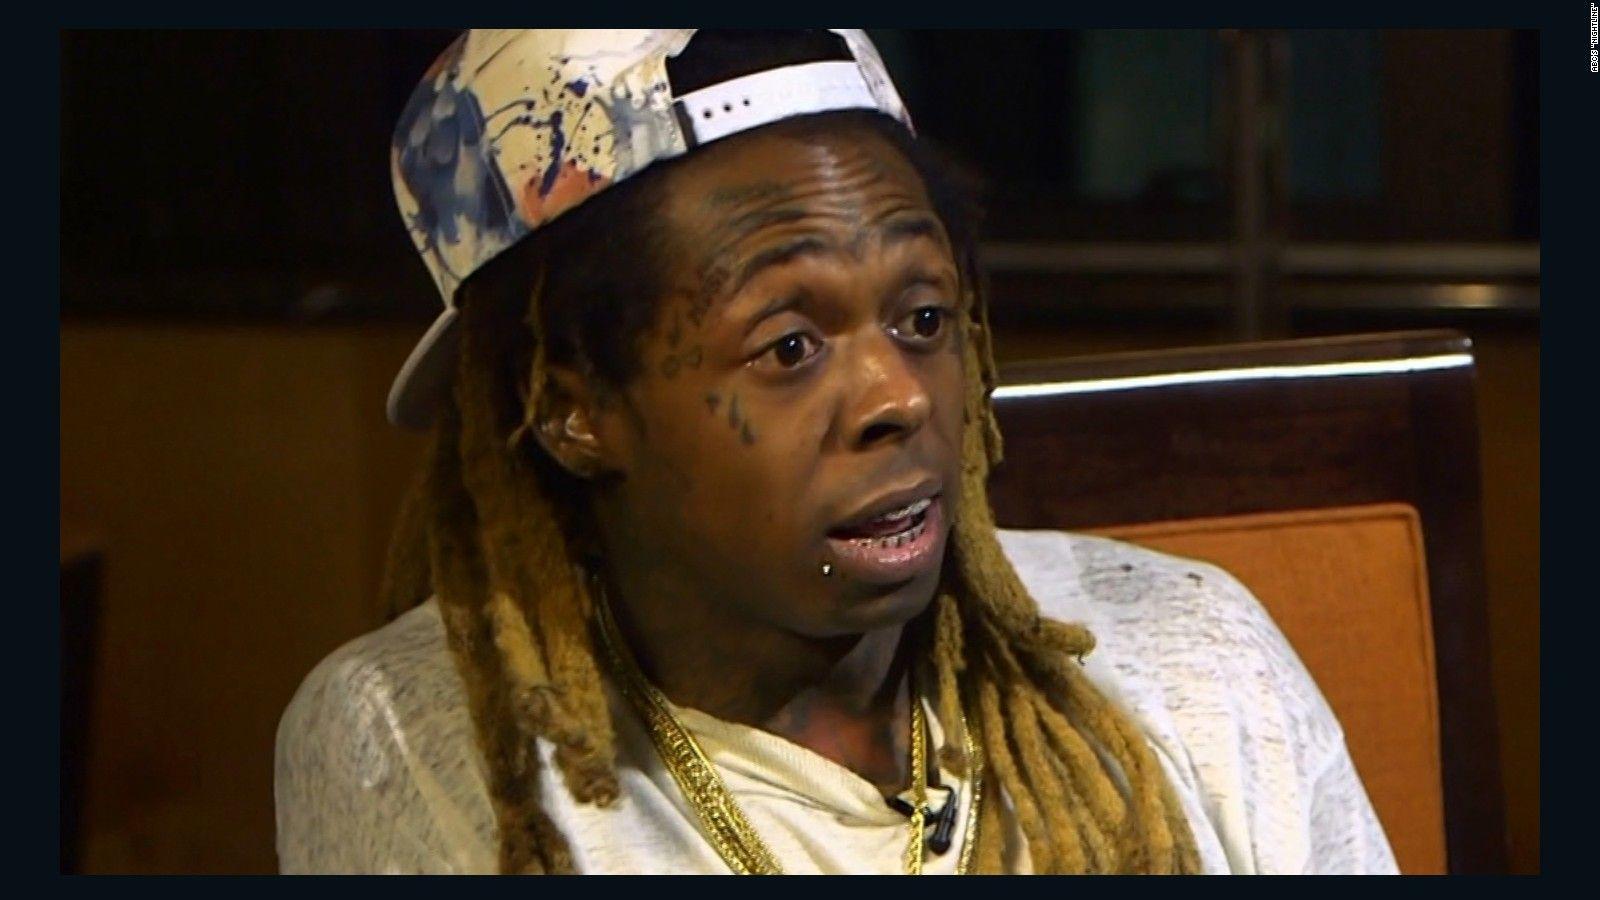 Lil Wayne Admits When He Shot Himself It Was Really A Suicide Attempt